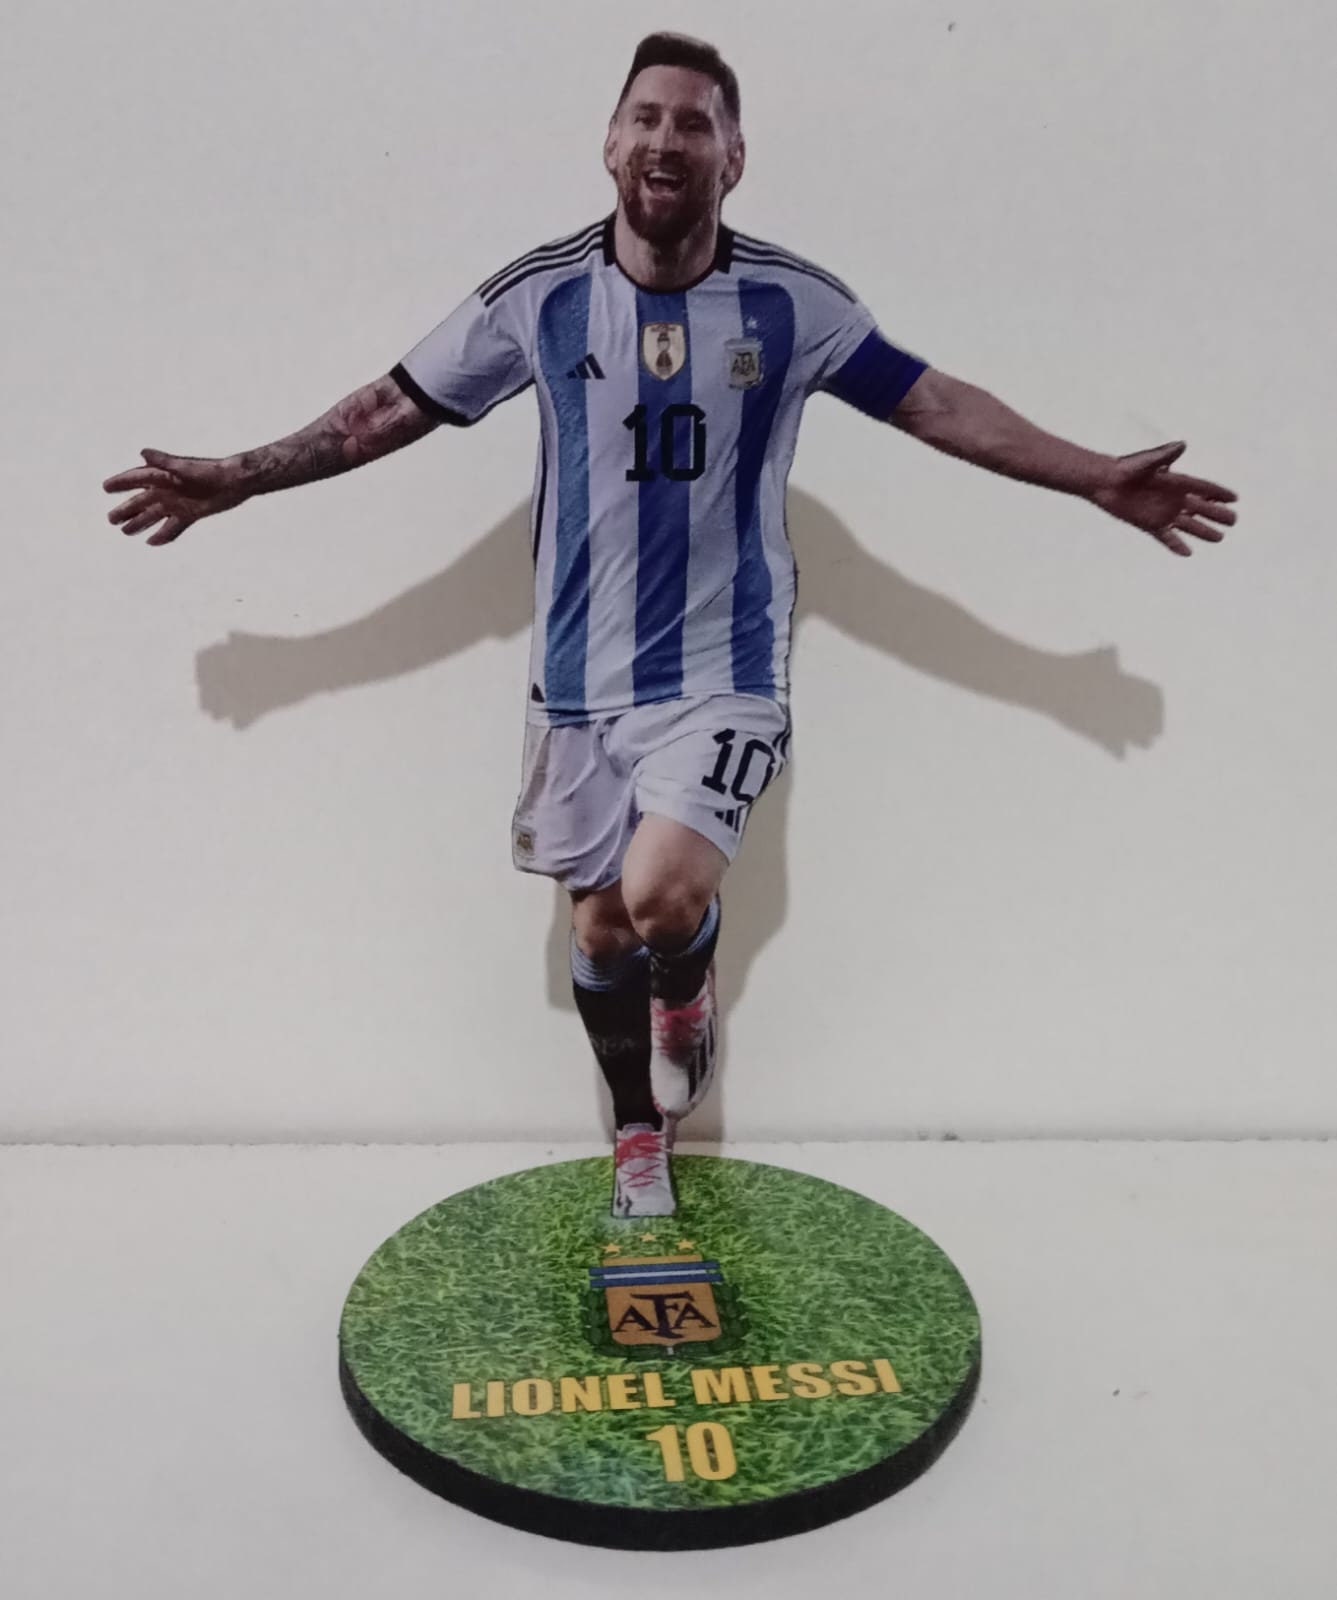 Funko Pop Football Stars LIONEL MESSI #50 Vinyl Figure Toys Action Figure  Collectible Dolls Kids Gifts - AliExpress